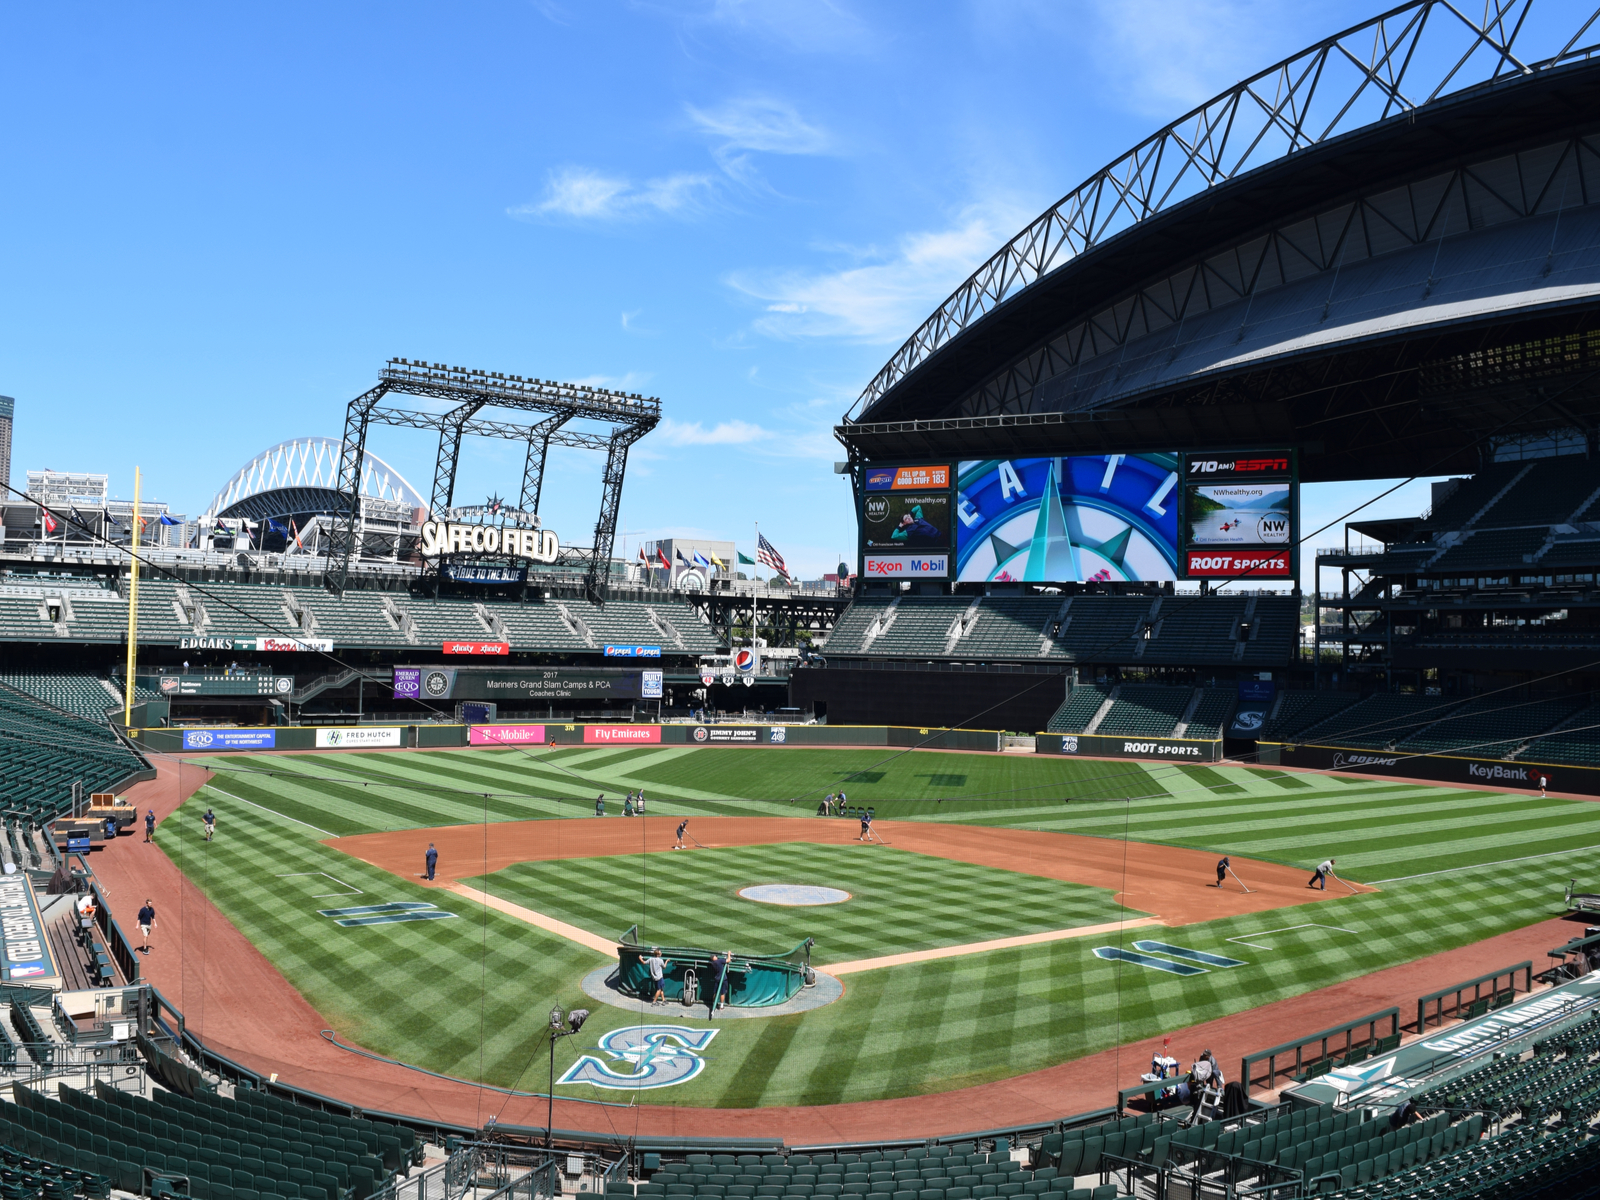 T mobile park as viewed from a seat, one of the best things to do in Seattle